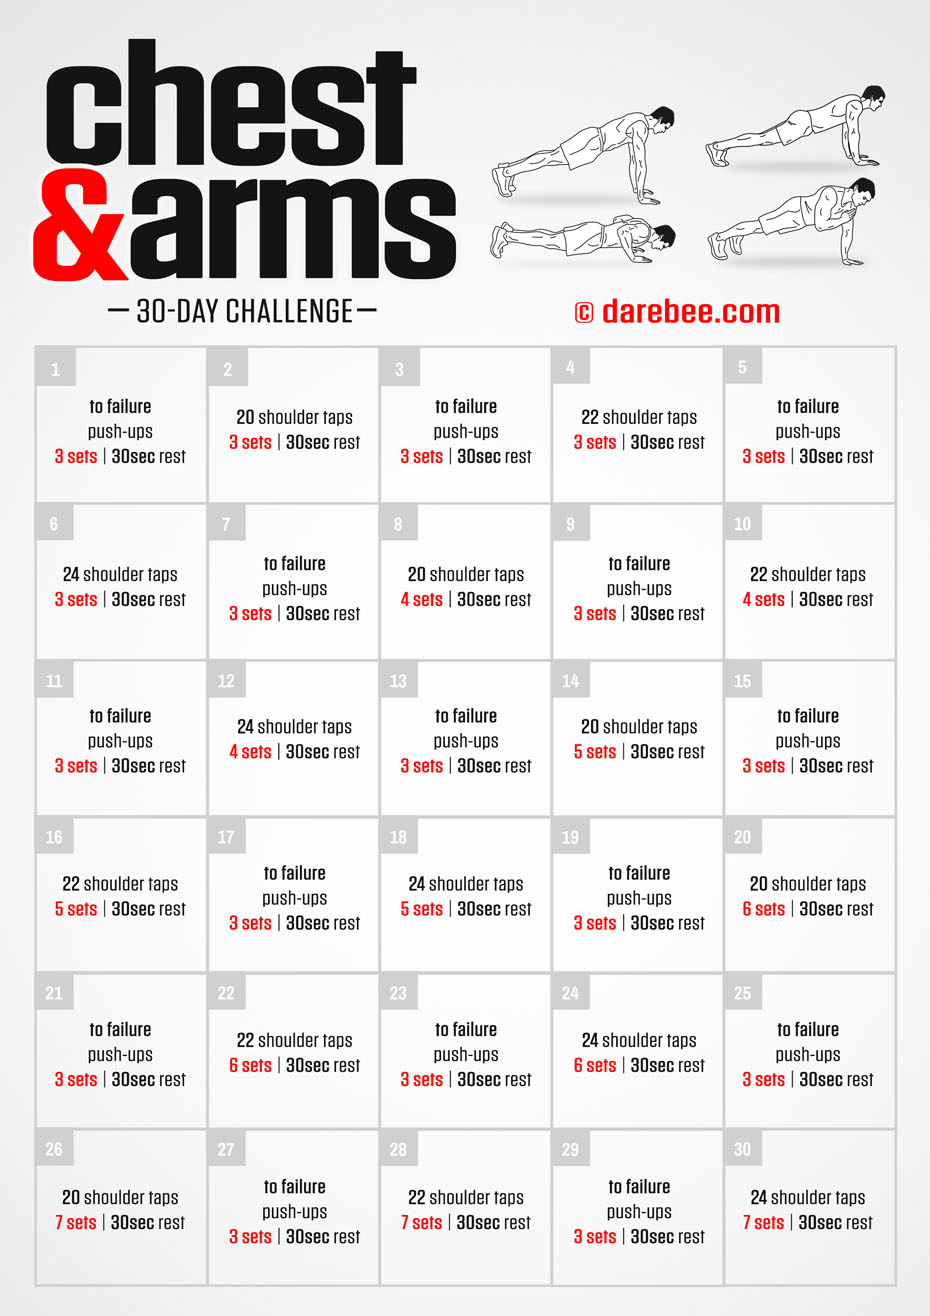 IRON Series 30 Min Arms and Abs Workout – Biceps, Triceps